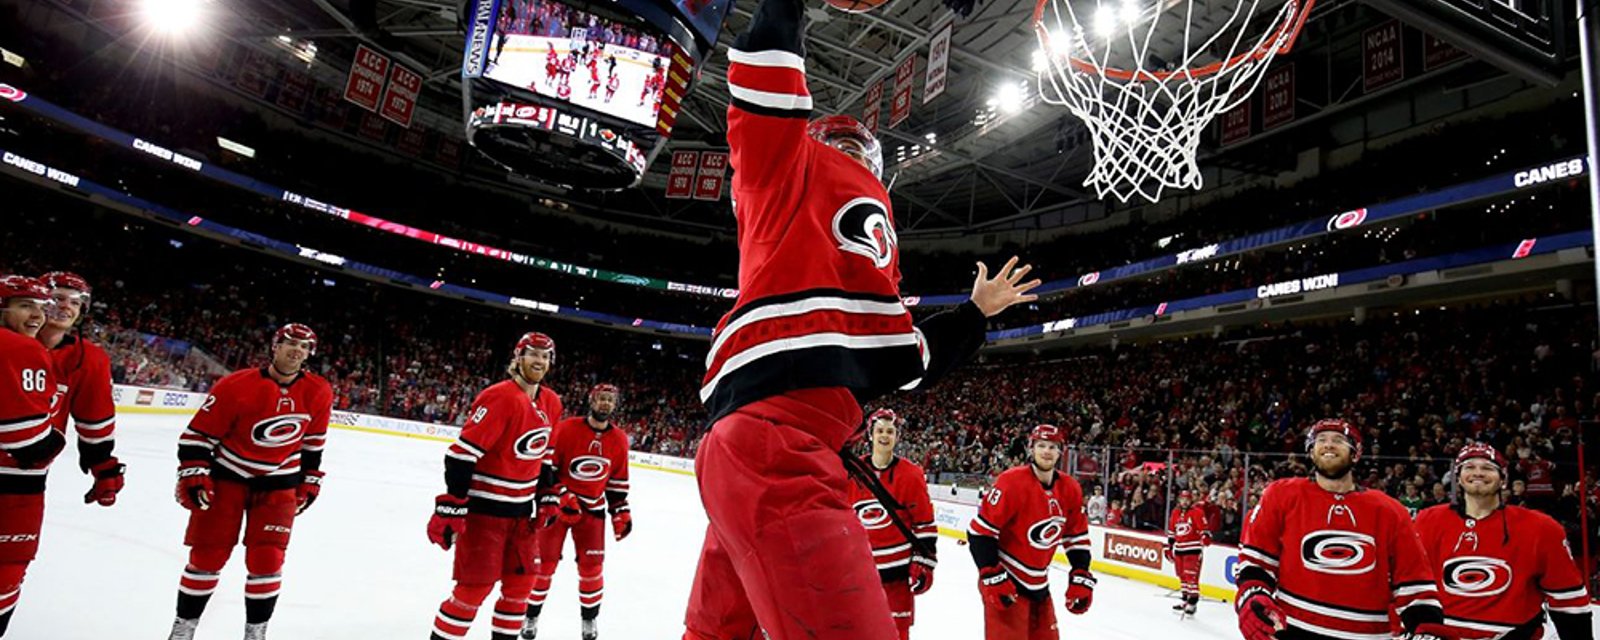 Carolina Hurricanes dunk on Montreal author who says they “embarrassed” hockey